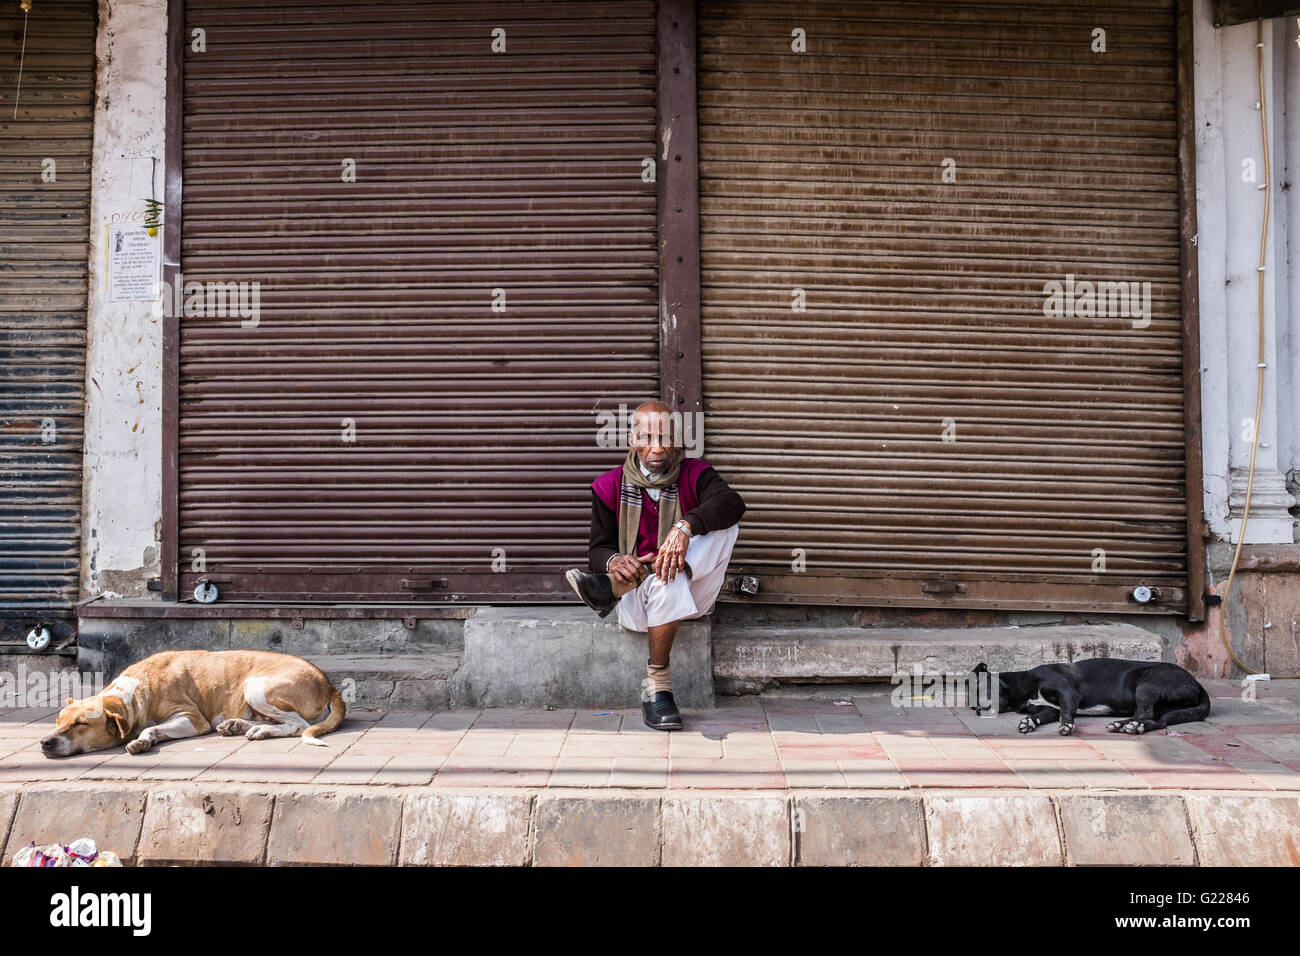 Man sitting outside shuttered shop with two sleeping dogs in Delhi, India Stock Photo